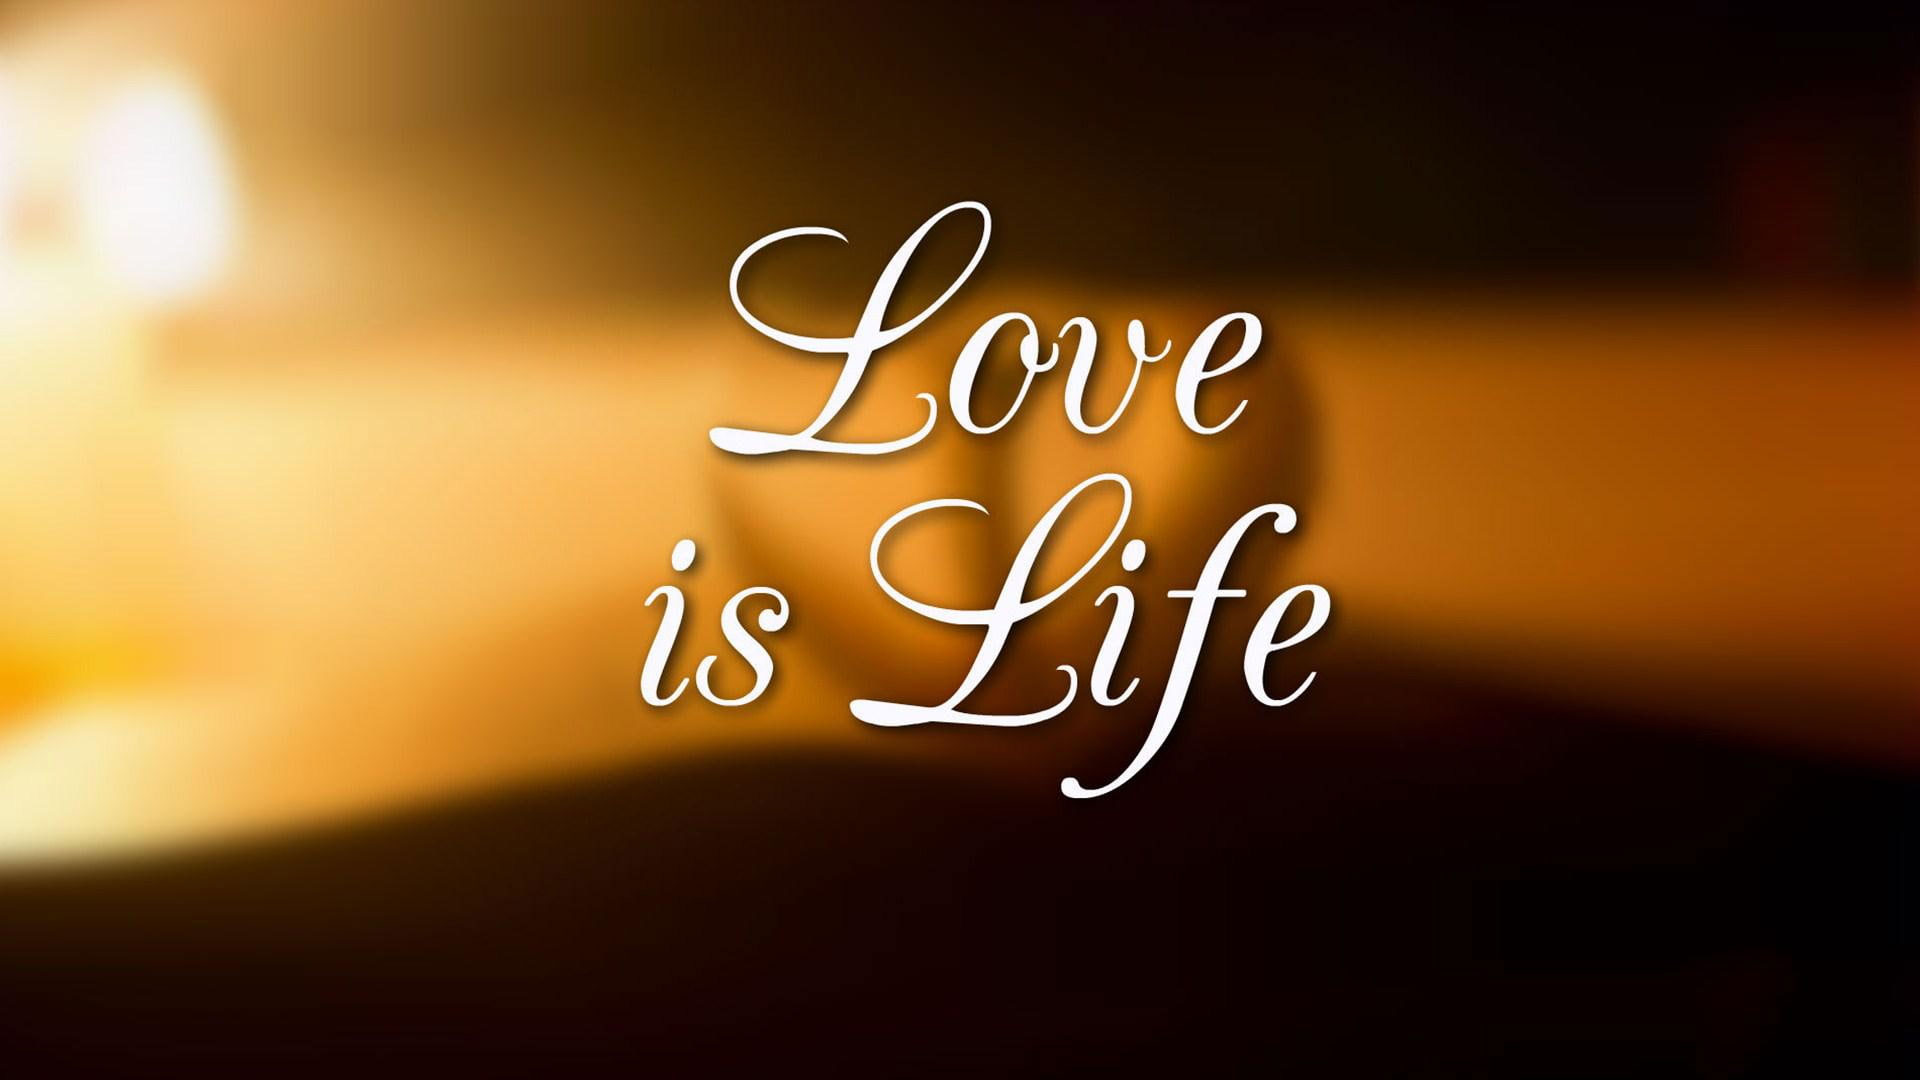 Love is life wallpaper, quote